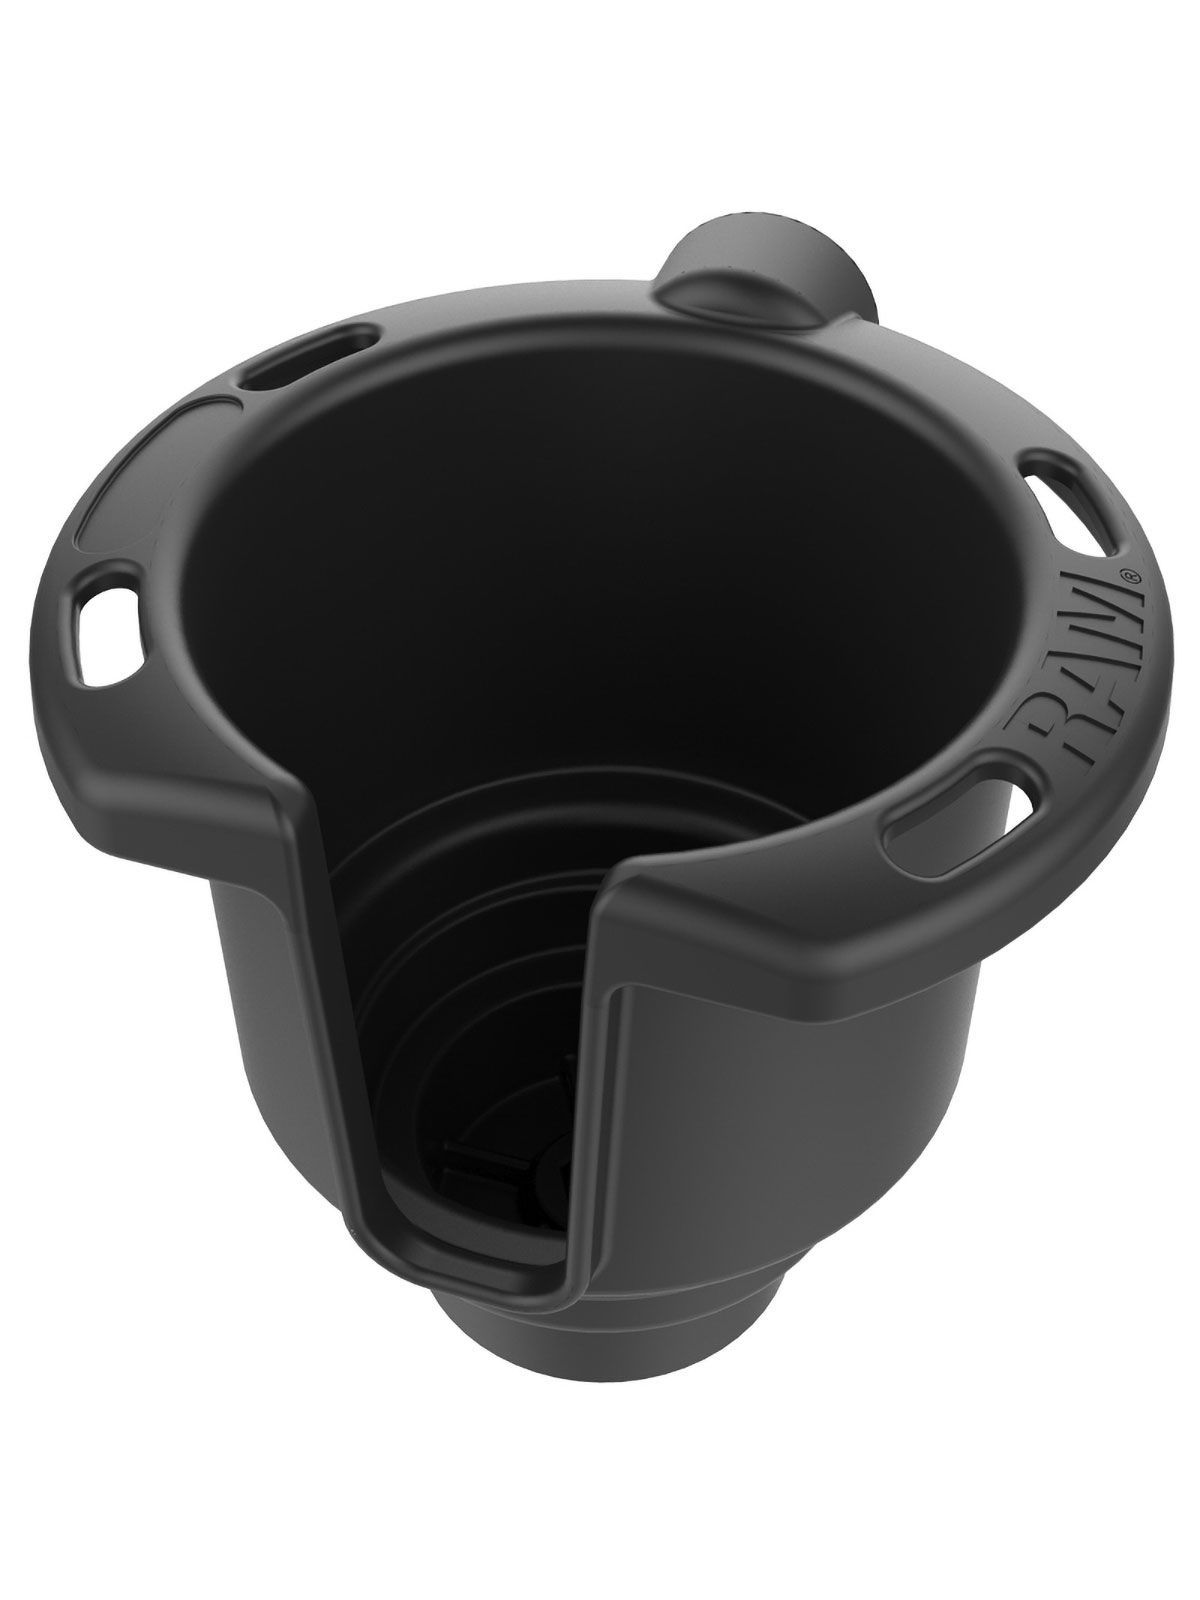 RAM® Cup Holder with Leash Plug Adapter